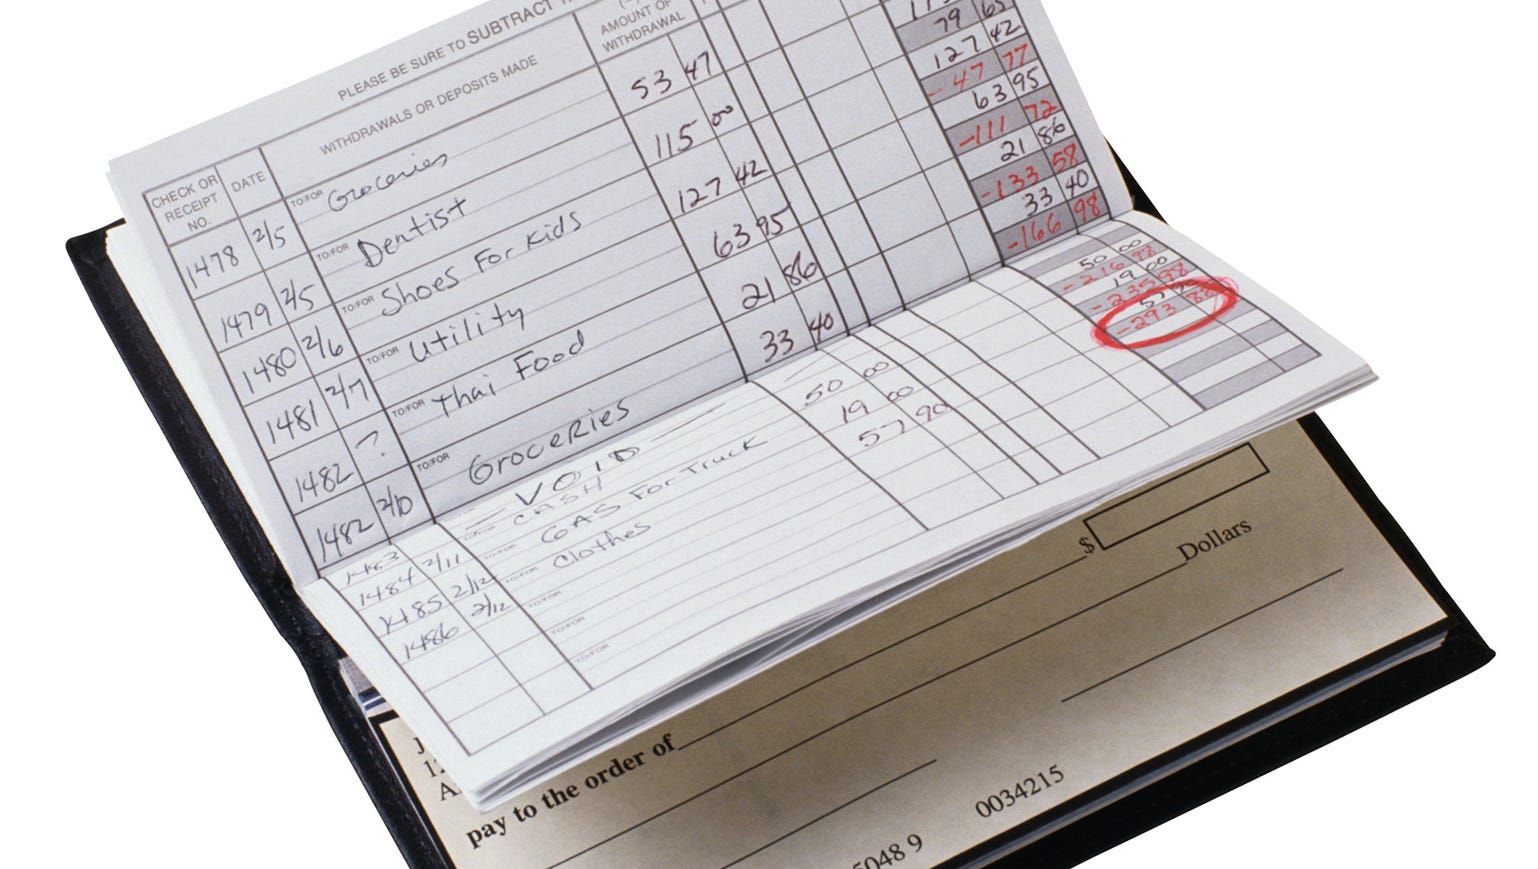 How To Balance A Checkbook In A Paperless World – Forbes Advisor